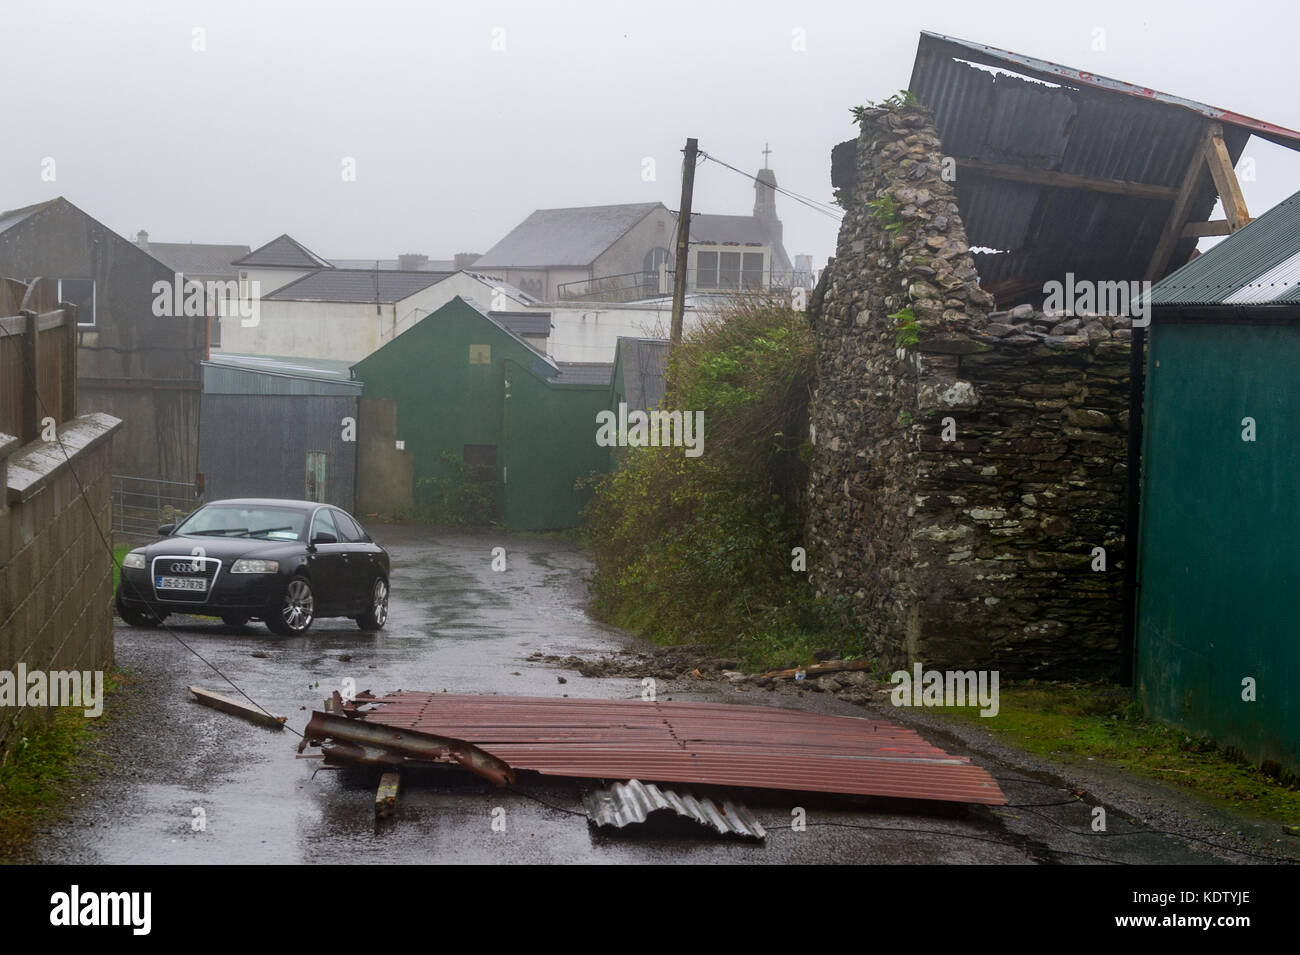 Schull, Ireland. 16th Oct, 2017. UK Weather.  Ex-Hurricane Ophelia hits Schull, Ireland with winds of 80kmh and gusts of 130kmh.  Major structural damage is expected as the worst is yet to come. A tin roof blocks the entrance and exit to Centra in Schull. Credit: Andy Gibson/Alamy Live News. Stock Photo